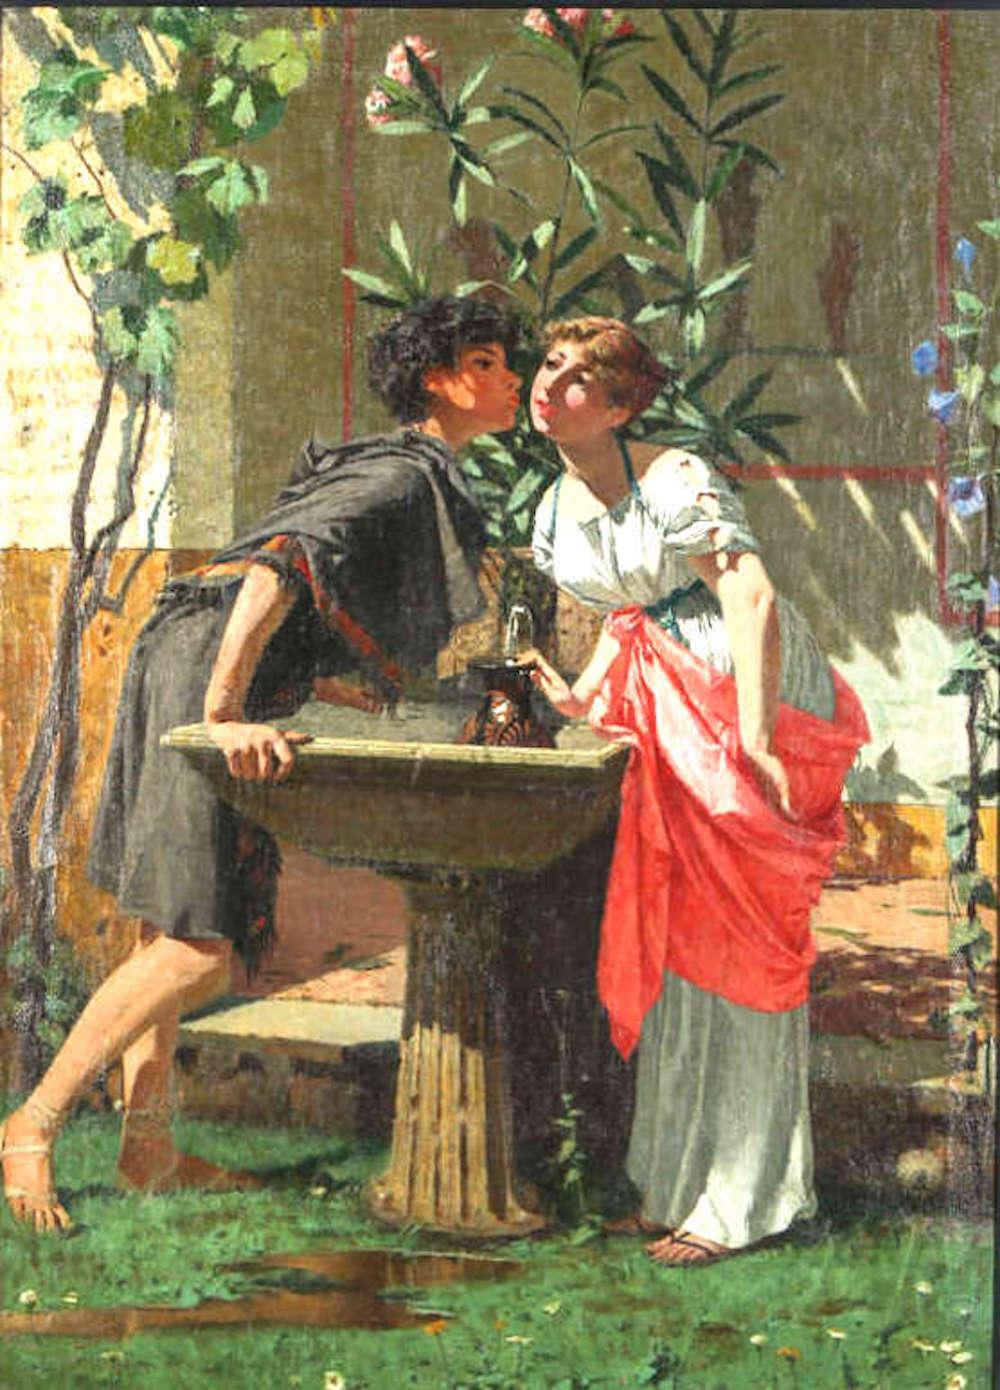 Lovers by a fountain, painting oil on canvas,
Signed left sight.

Measures: cm 70 x 100 frame 118 x 145

Faustini Modesto. Brescia, 27 maggio 1839 - Roma, 23 marzo 1891.
Born in Brescia in 1839, Modesto Faustini was orphaned at the age of six